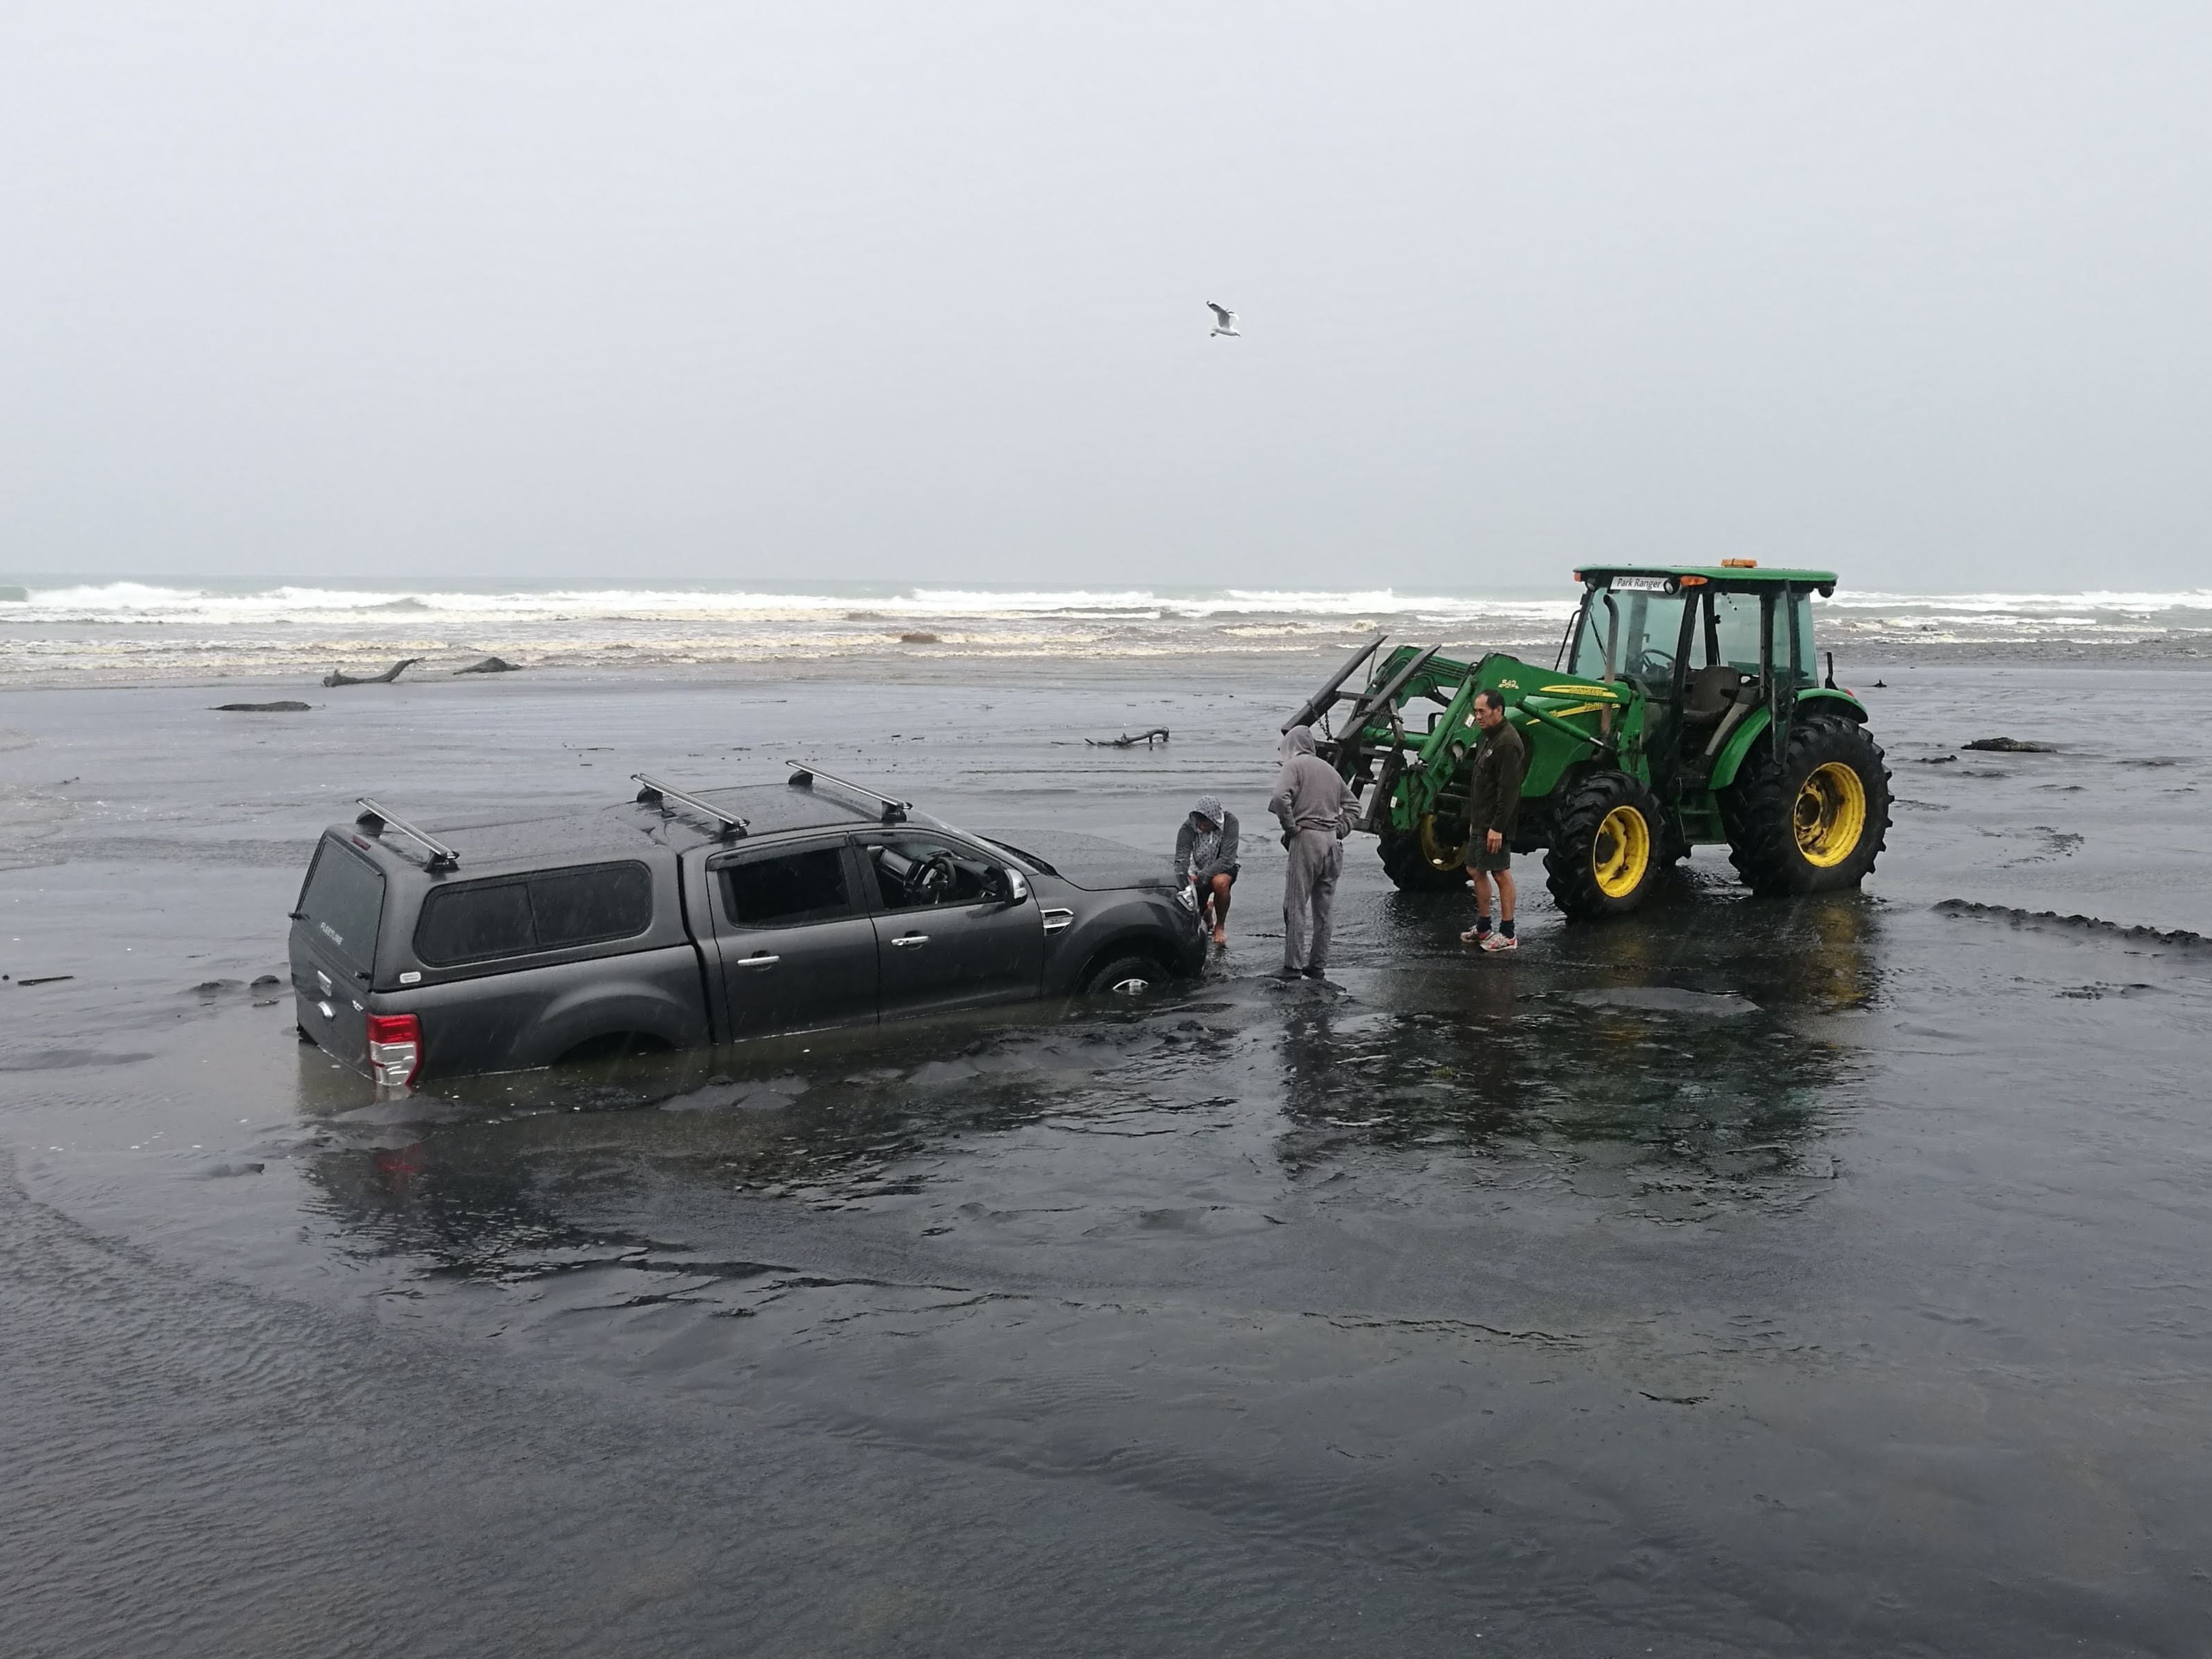 Auckland Council Park Ranger rescuing a 4WD before it gets damaged by the incoming tide